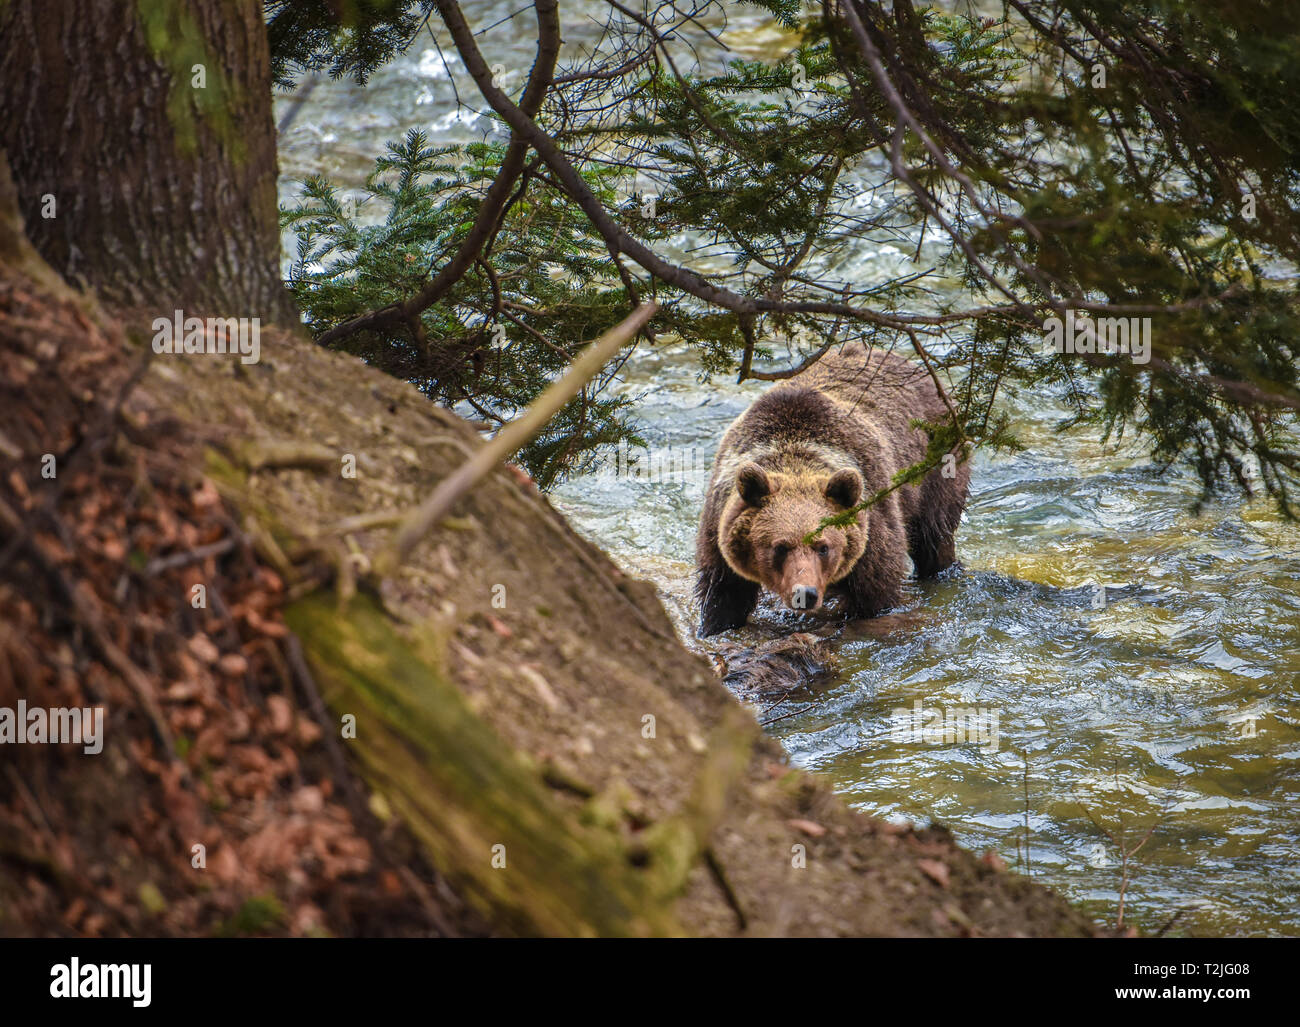 Wild brown bear crossing river in Carpathian forest Stock Photo